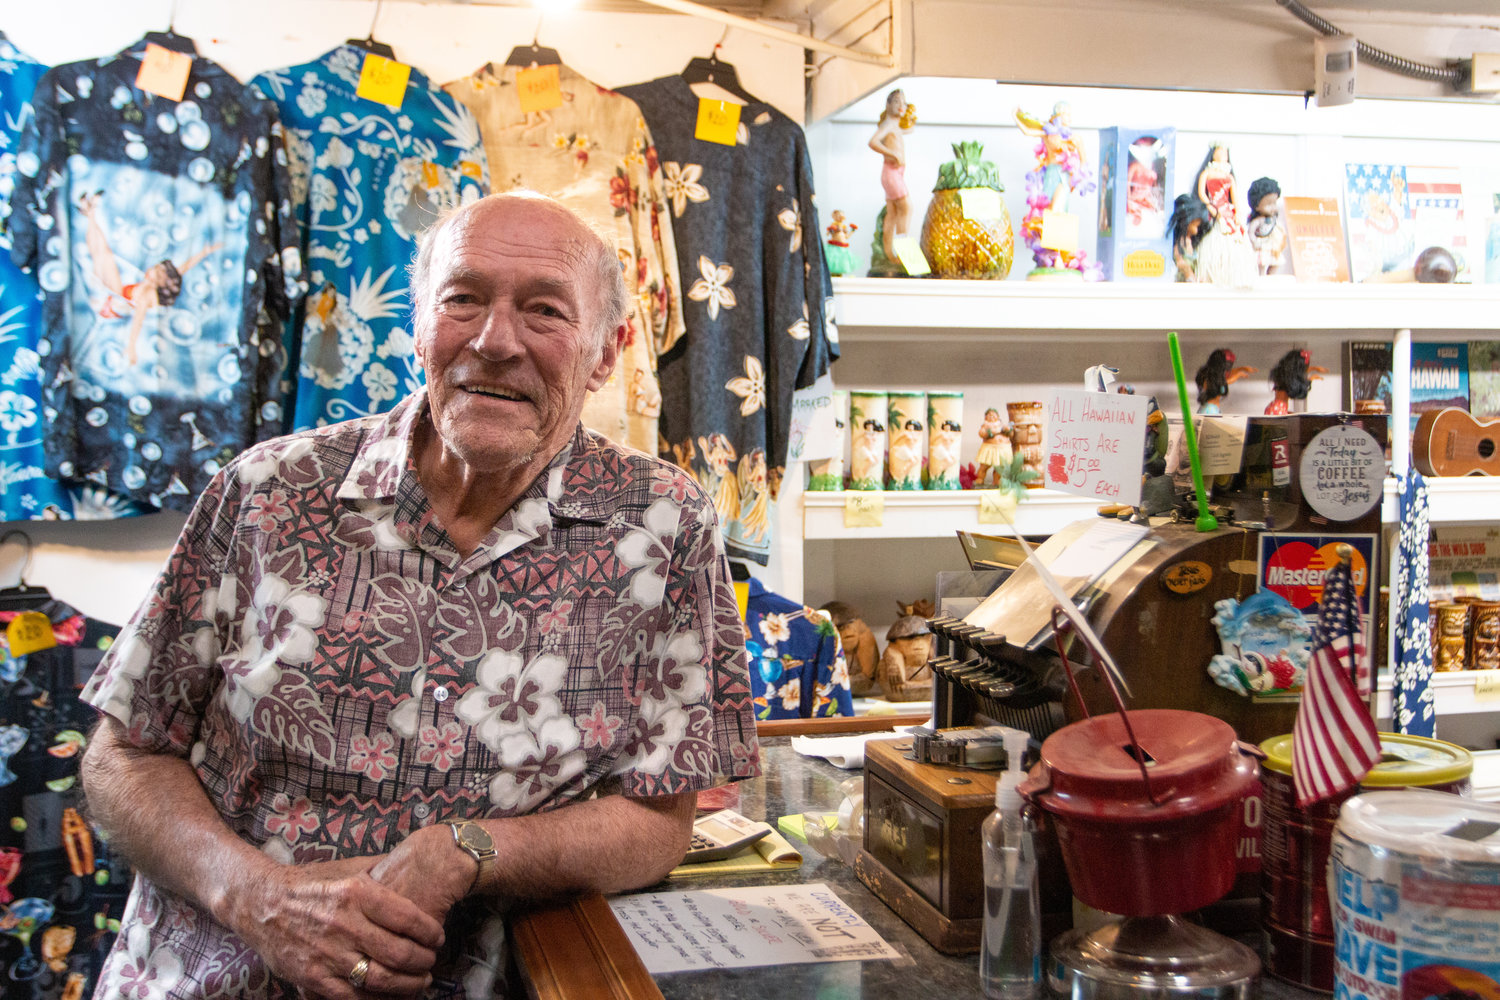 Pat Slusher, owner of Pat Slusher’s Coin Shop, poses with his antique register and wall full of Hawaiian items. At the age of 79, he plans to retire to his oceanside property and relax with his wife Phoebe.